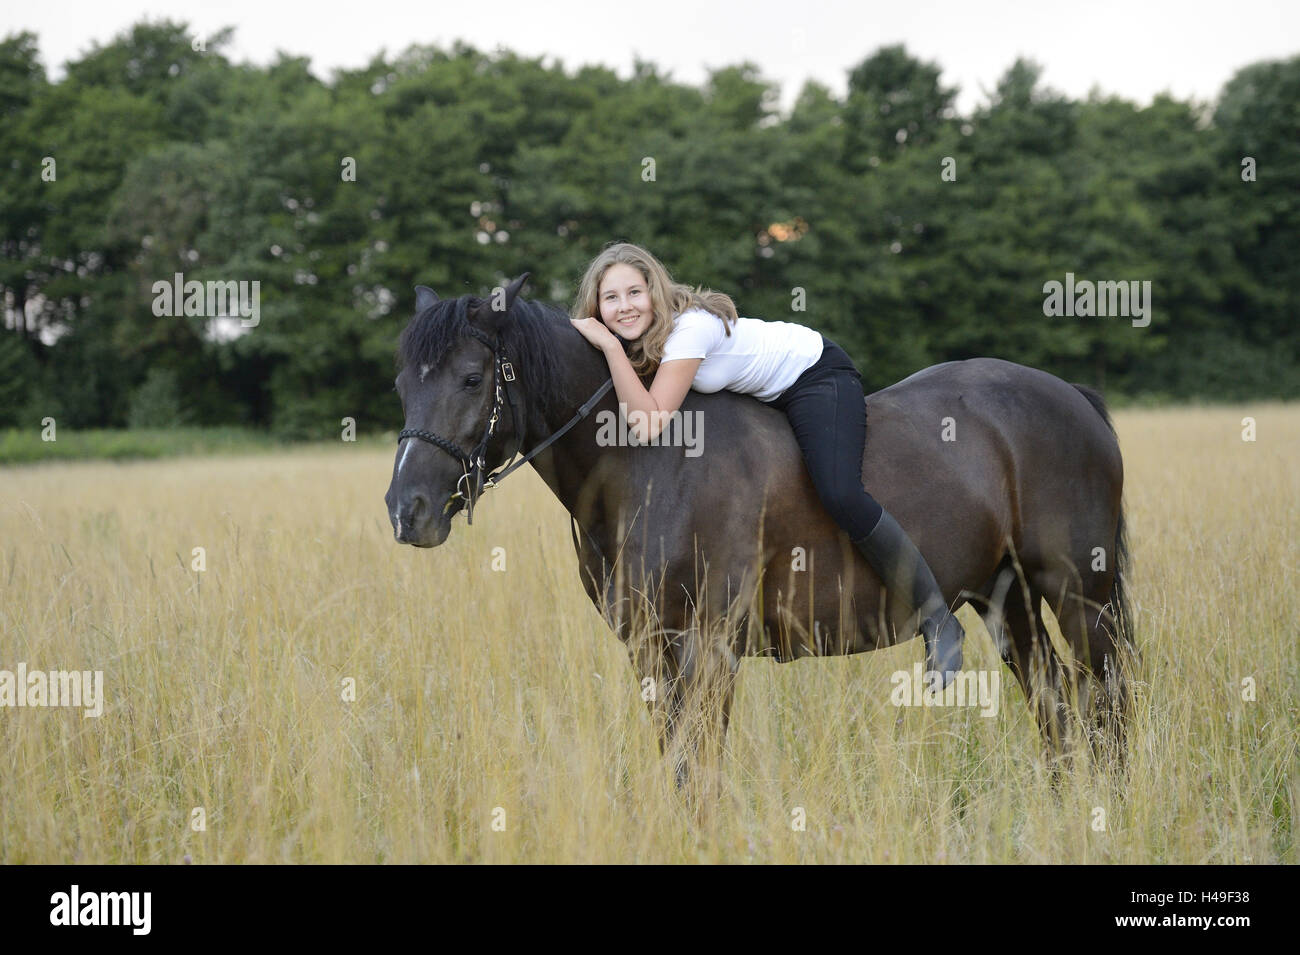 Girls, horse, back, lie, view camera, scenery, Stock Photo